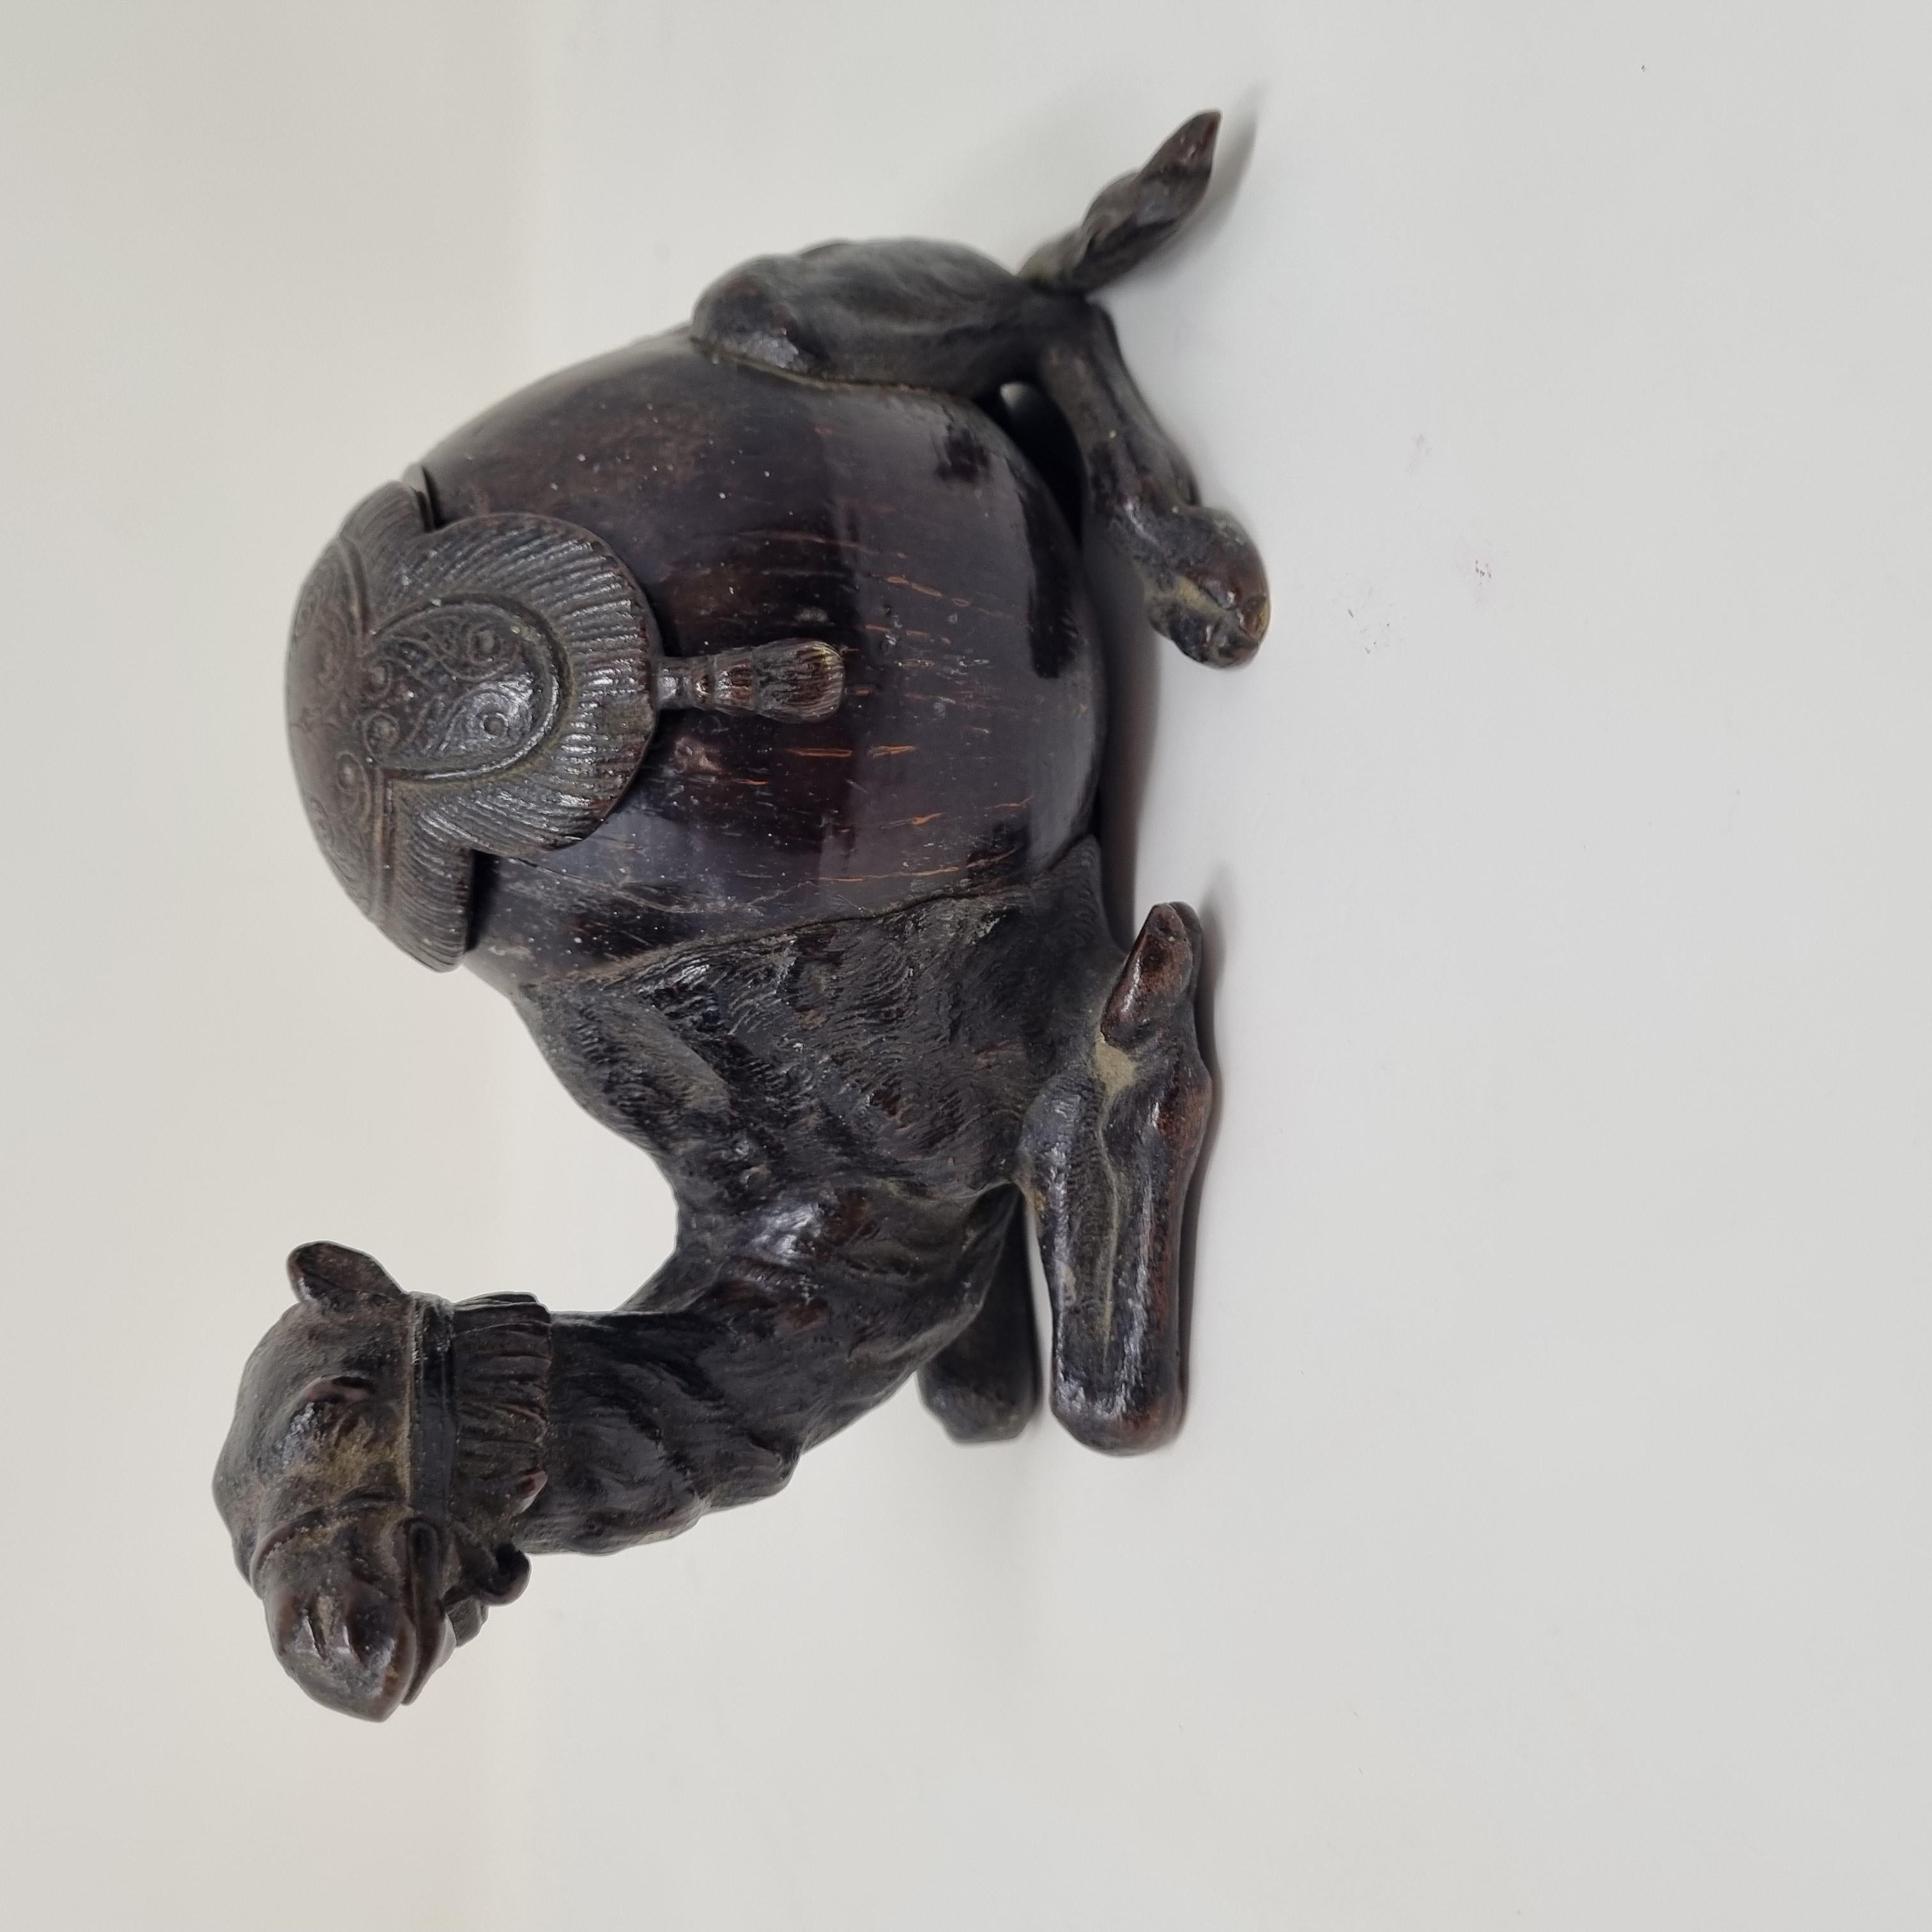 Original inkwell made from a coconut mounted in bronze
England ca 1880.